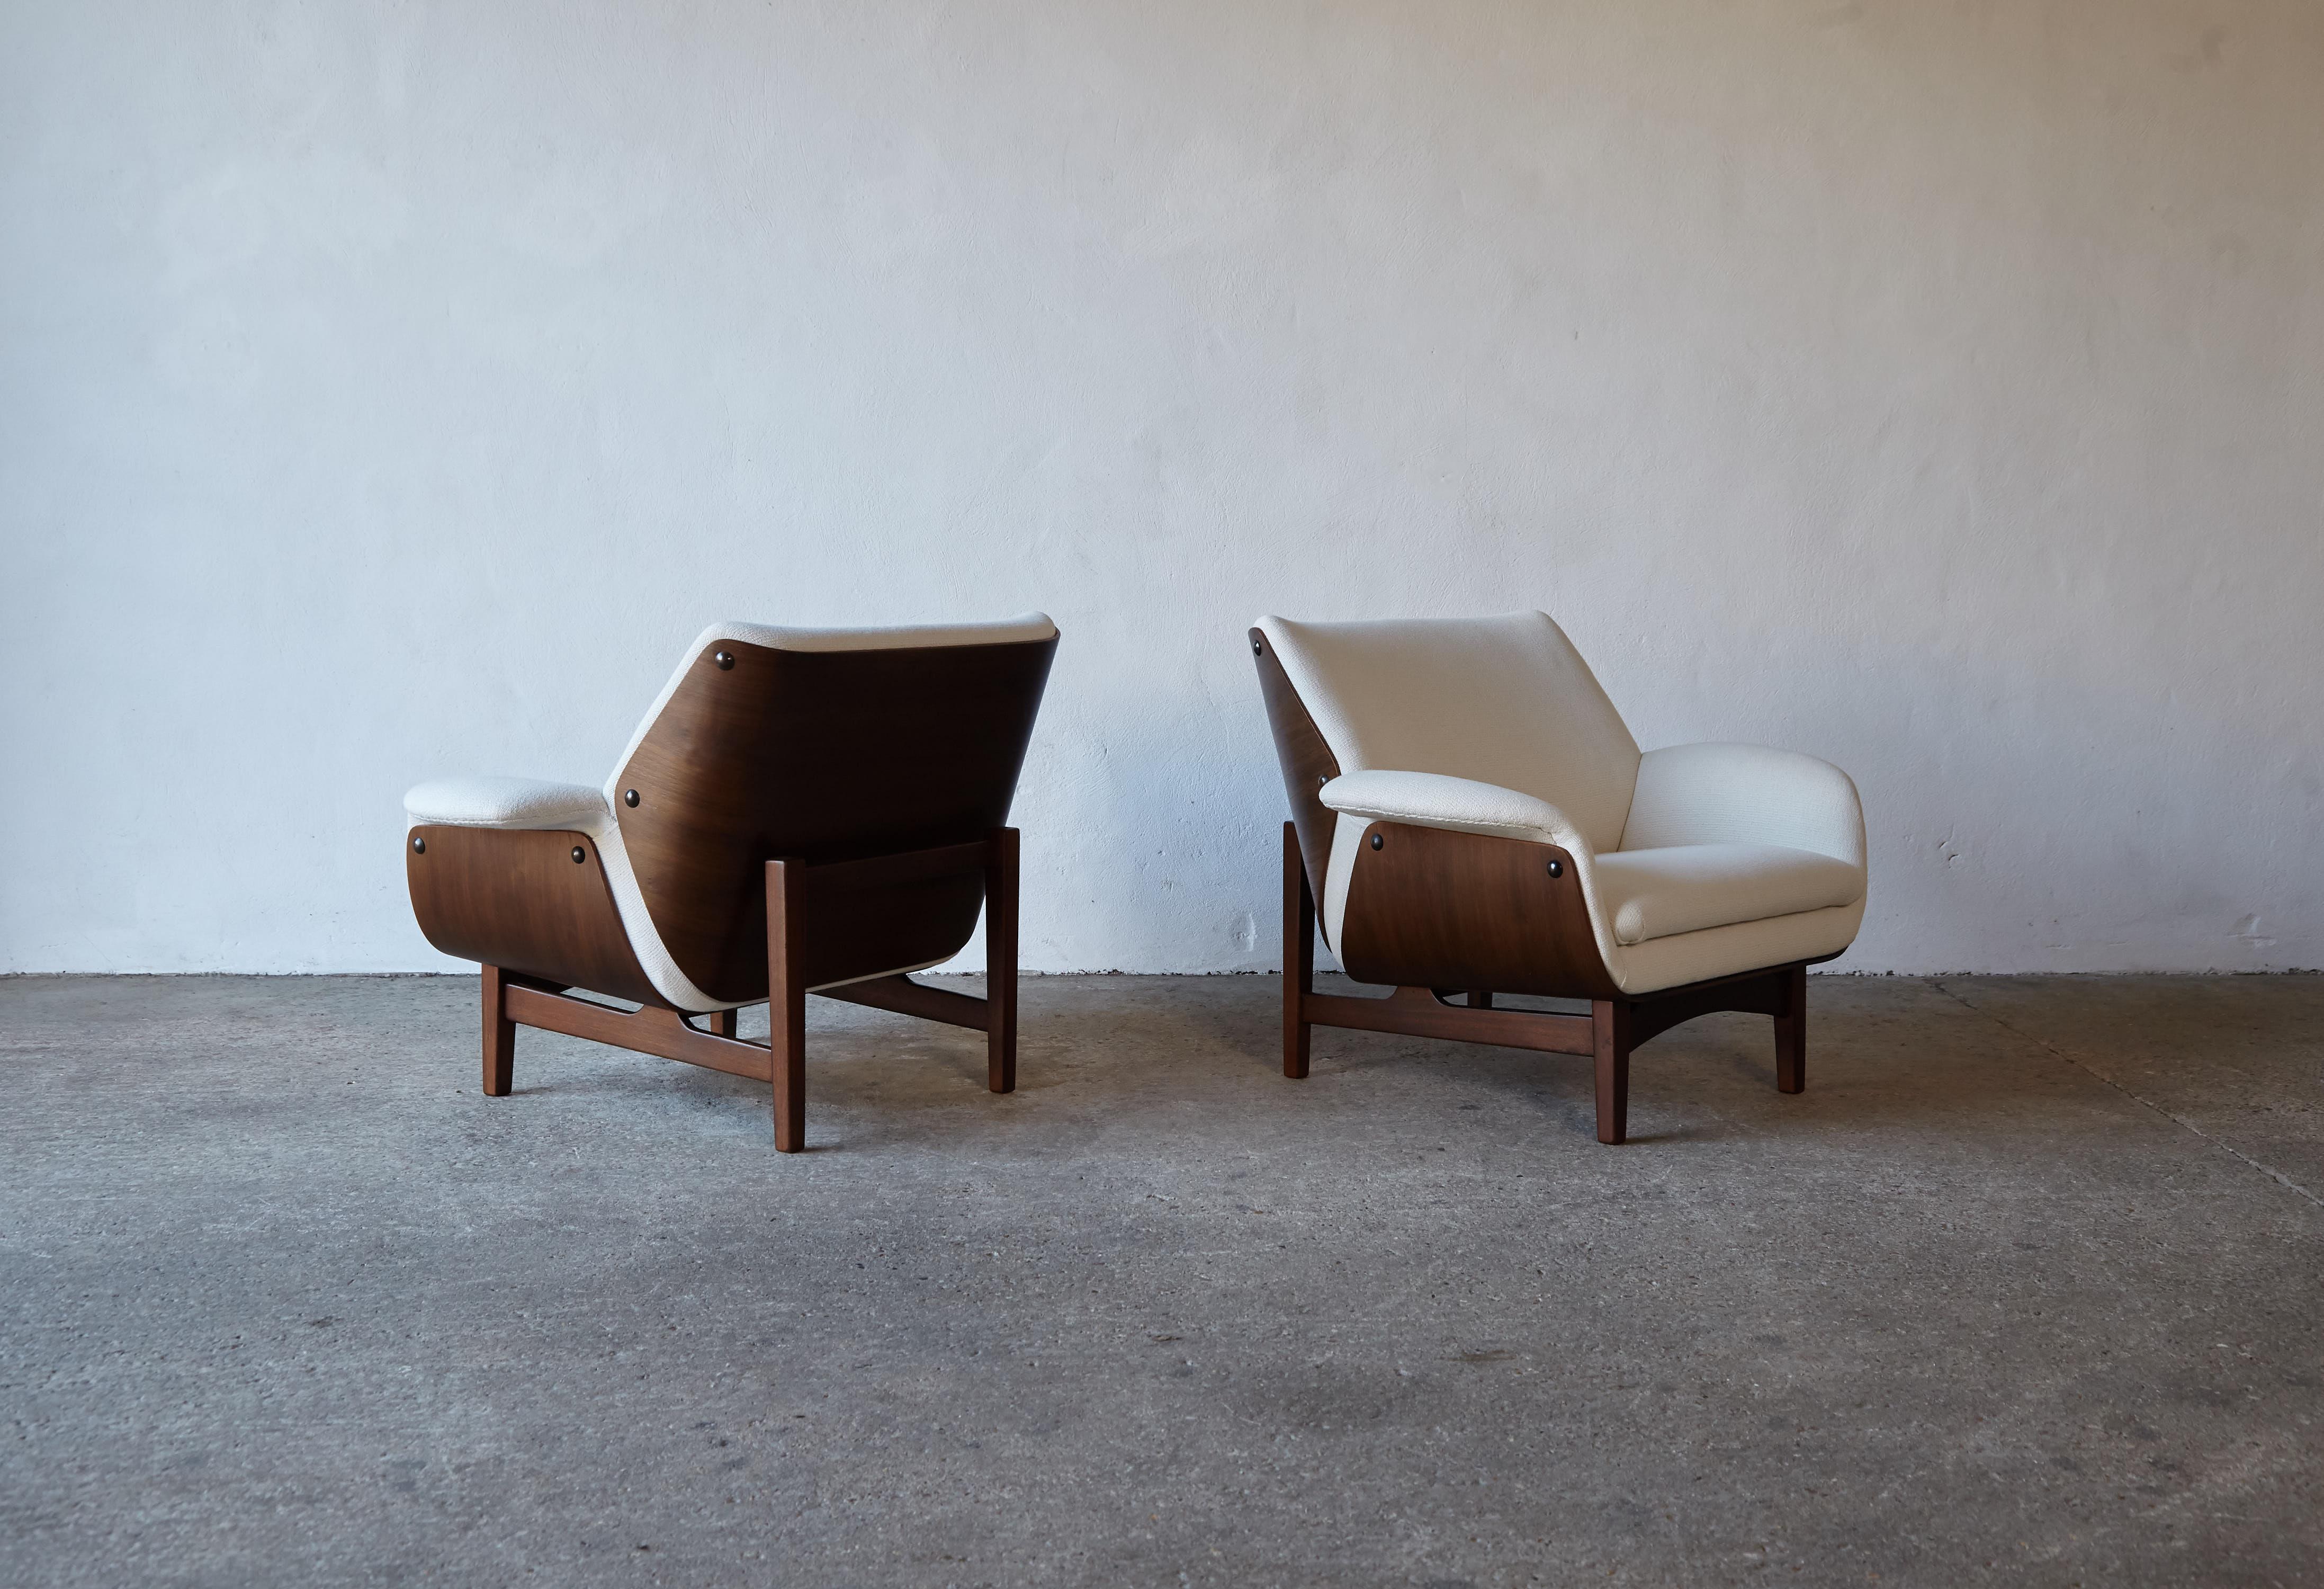 A very rare sculptural pair of lounge chairs, by Charles Joosten for Interstyle, Italy, 1960s. Walnut frames with comfortable seats newly upholstered in Larsen fabric. Fast shipping worldwide.
  


UK customers please note - listed prices here